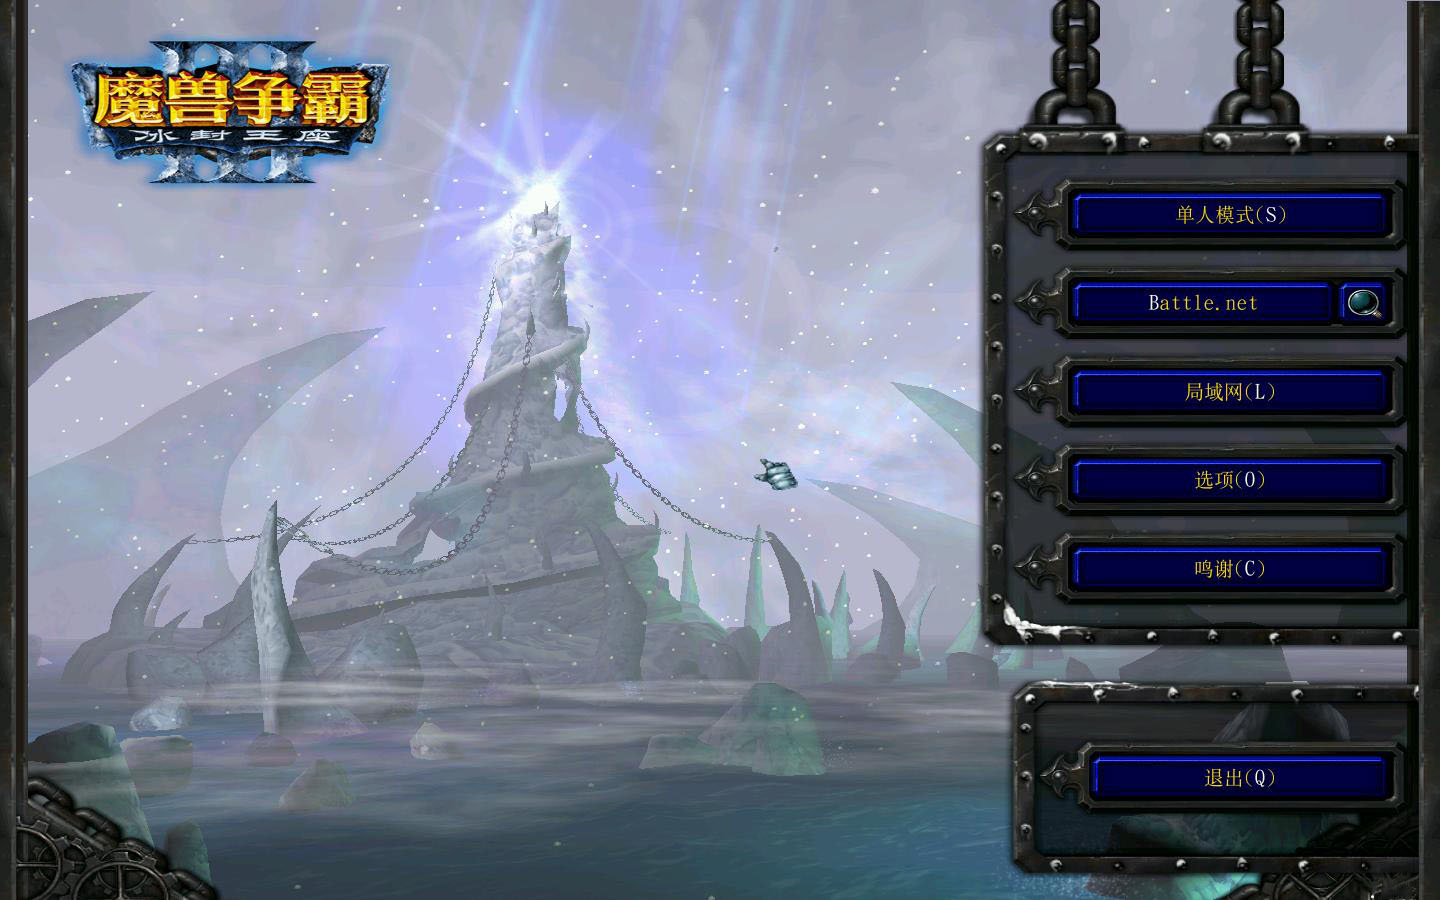 ħ3Warcraft III The Frozen Throne1.24-1.27Ӣ۵ v2.11޸